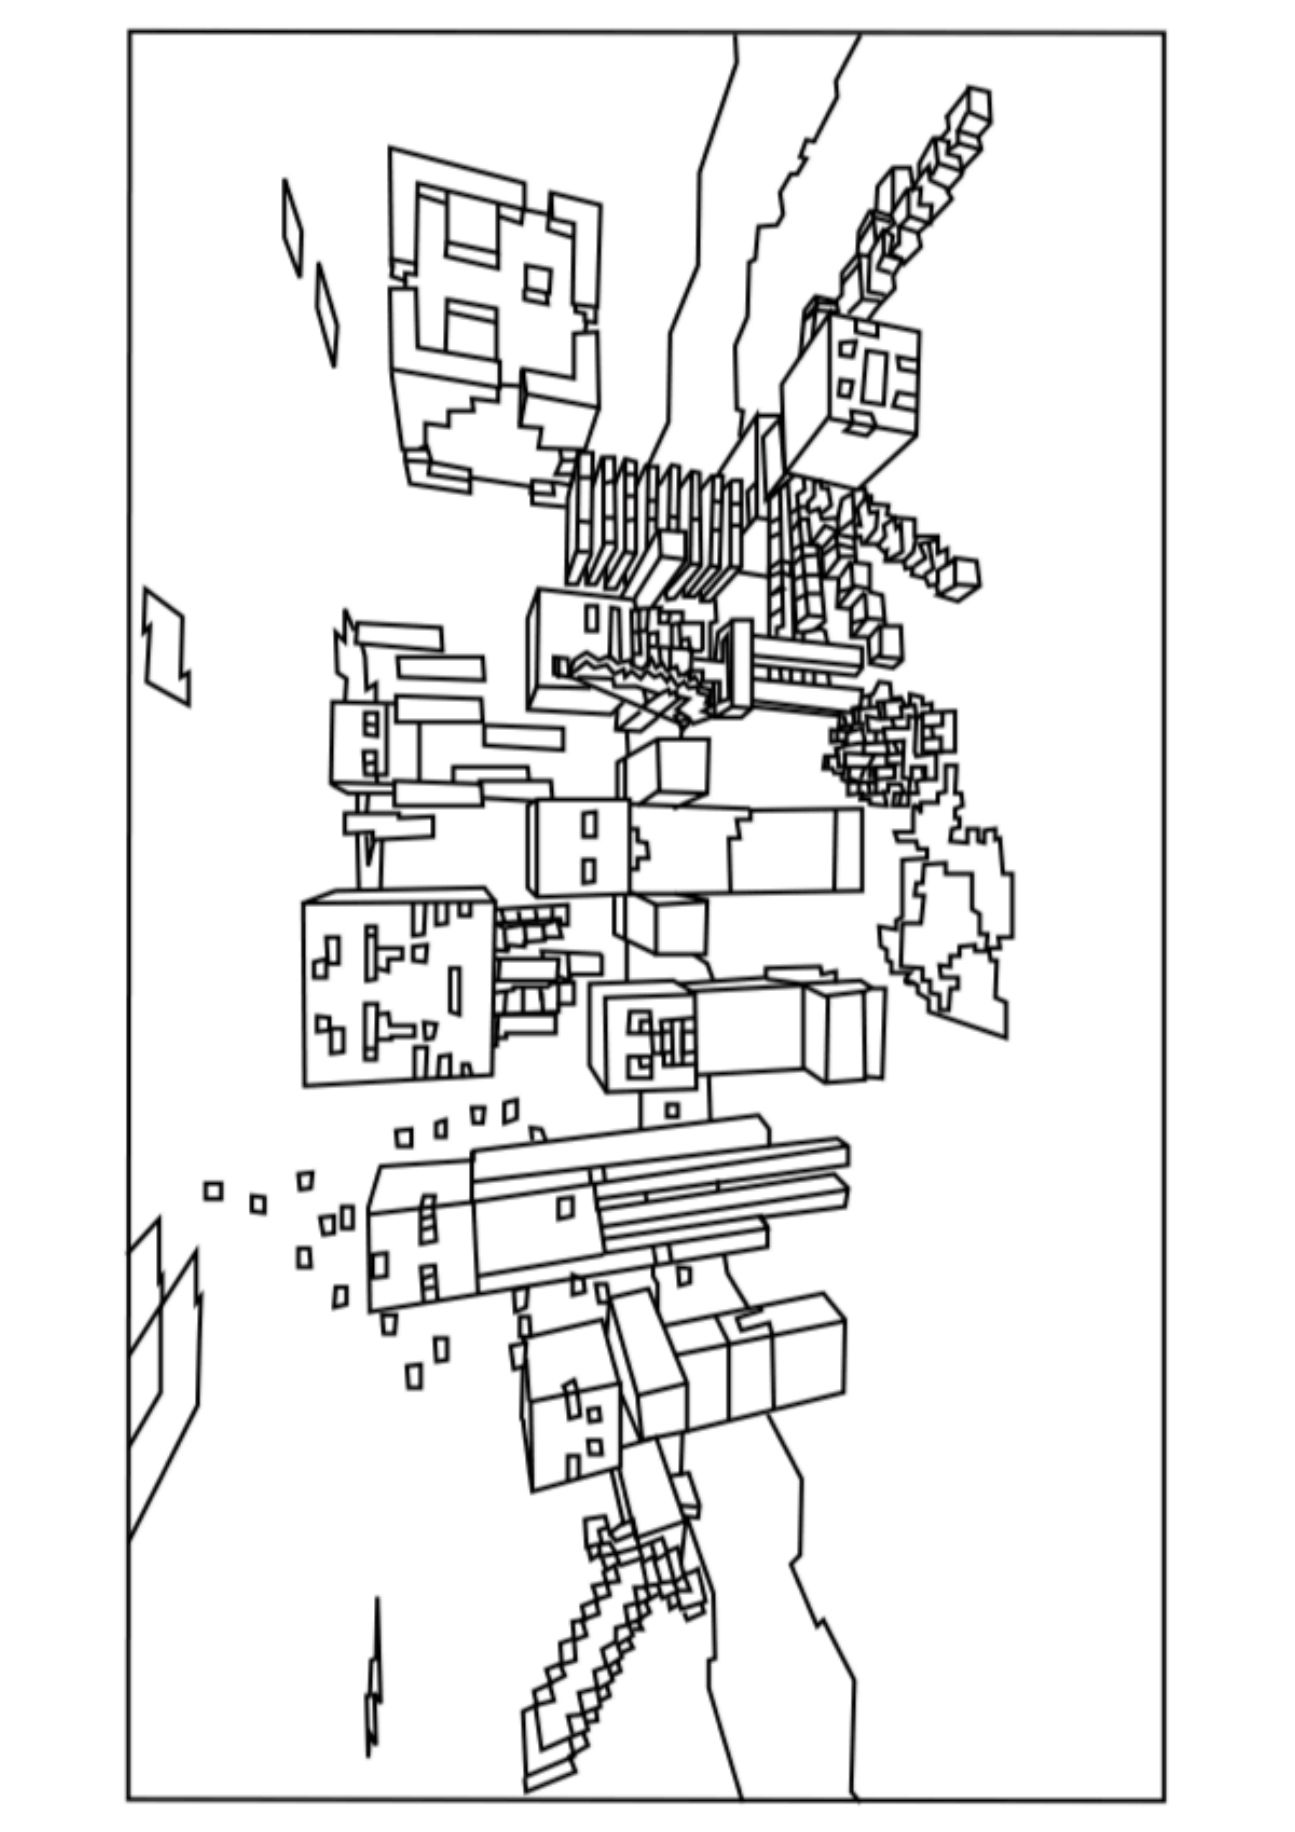 minecraft coloring pages mobs